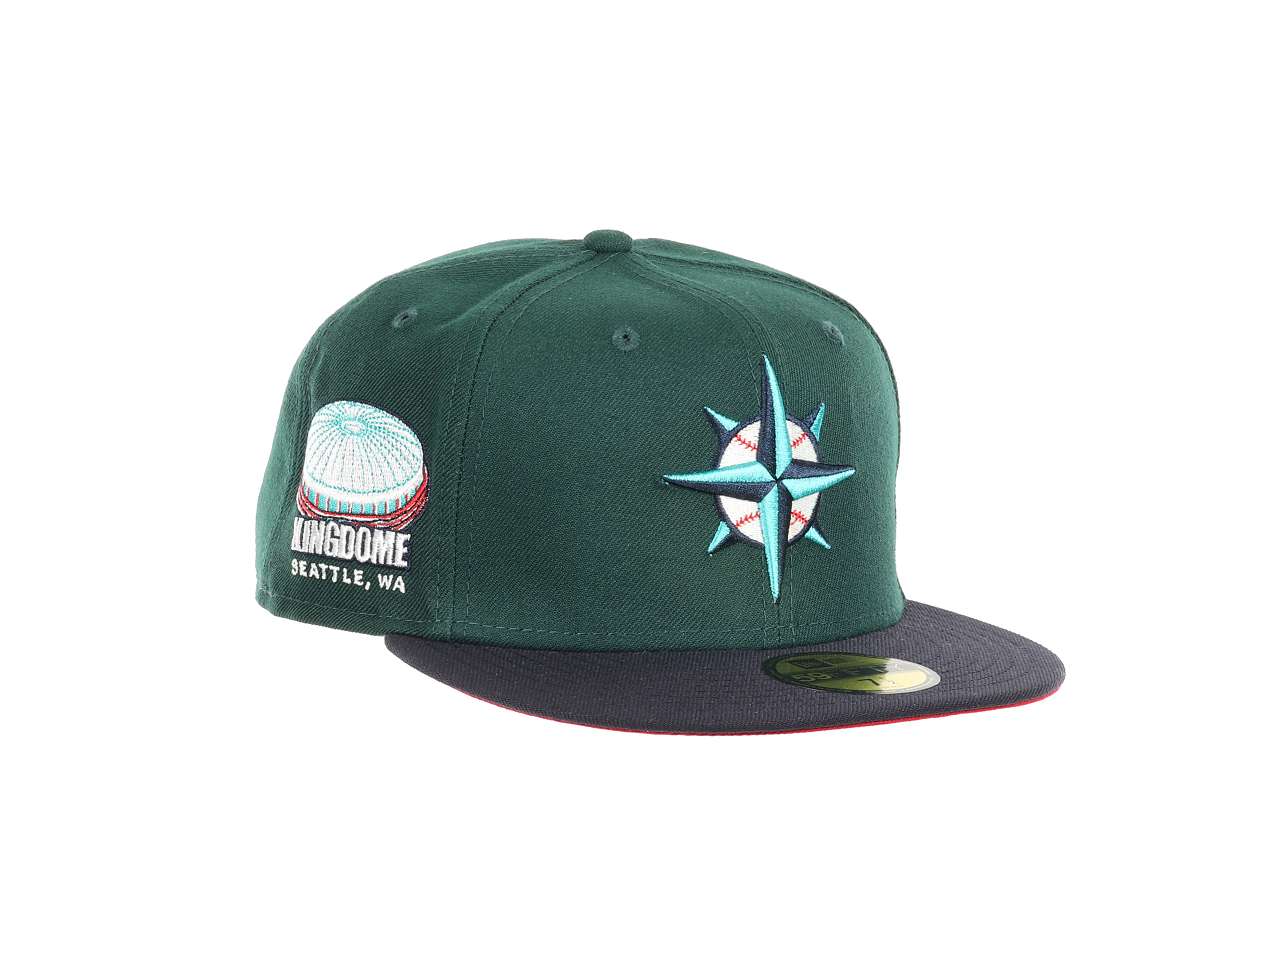 Seattle Mariners MLB Kingdome Seattle Sidepatch Brown 59Fifty Basecap New Era